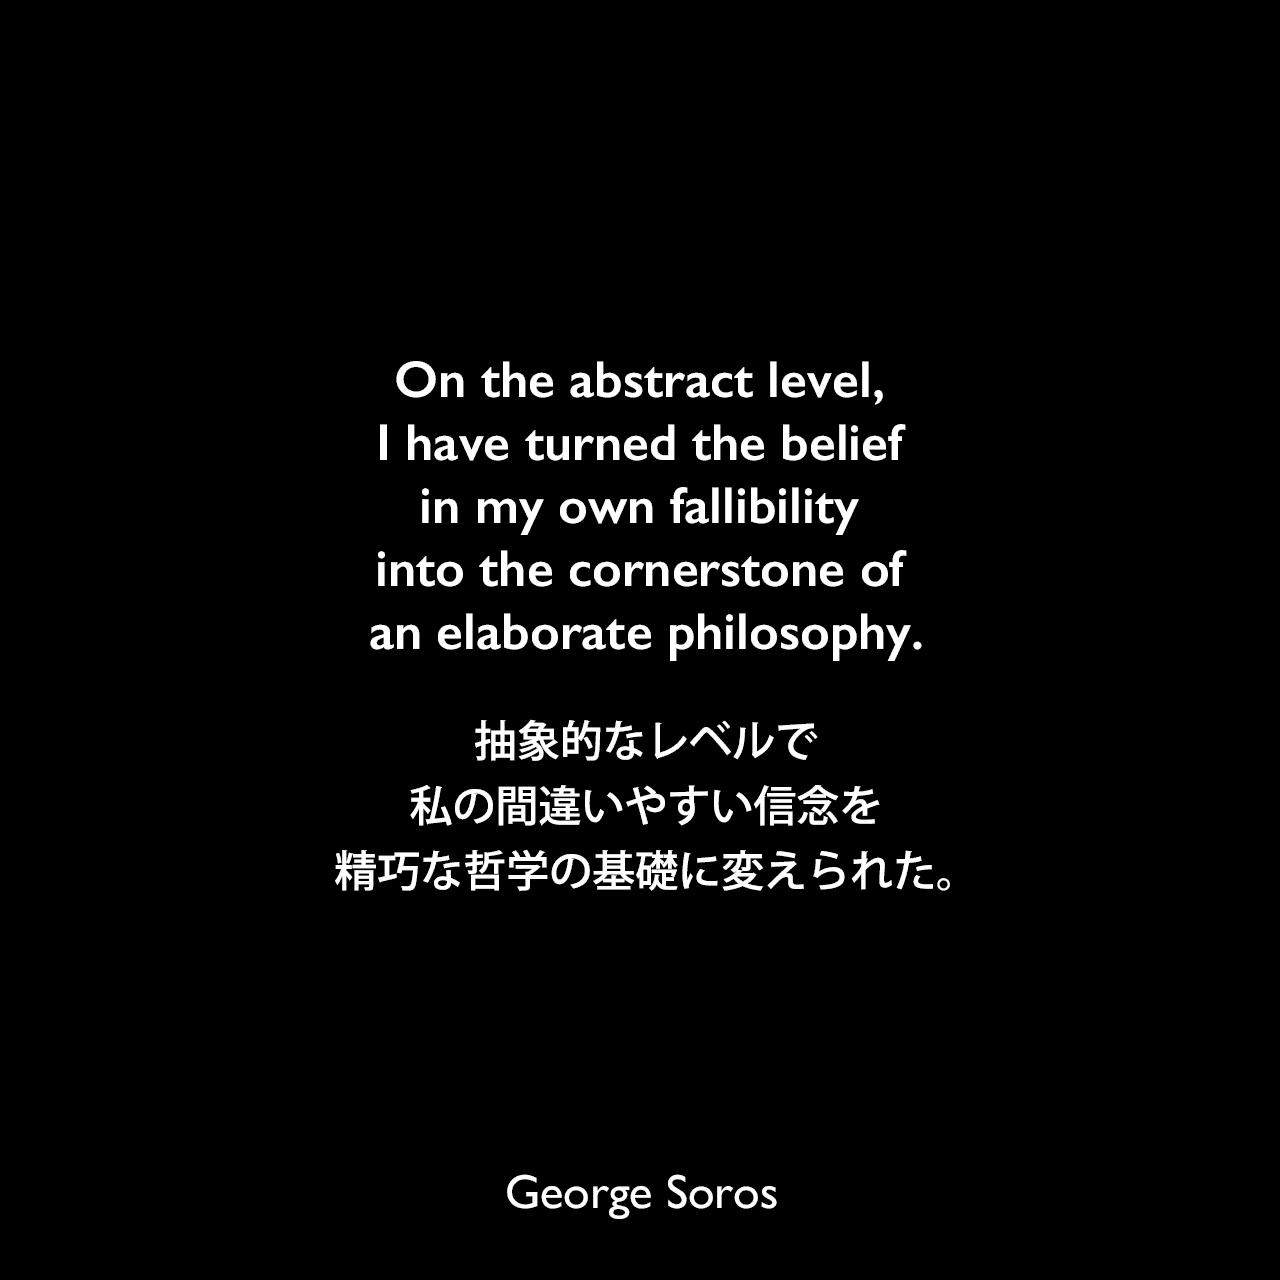 On the abstract level, I have turned the belief in my own fallibility into the cornerstone of an elaborate philosophy.抽象的なレベルで、私の間違いやすい信念を精巧な哲学の基礎に変えられた。George Soros